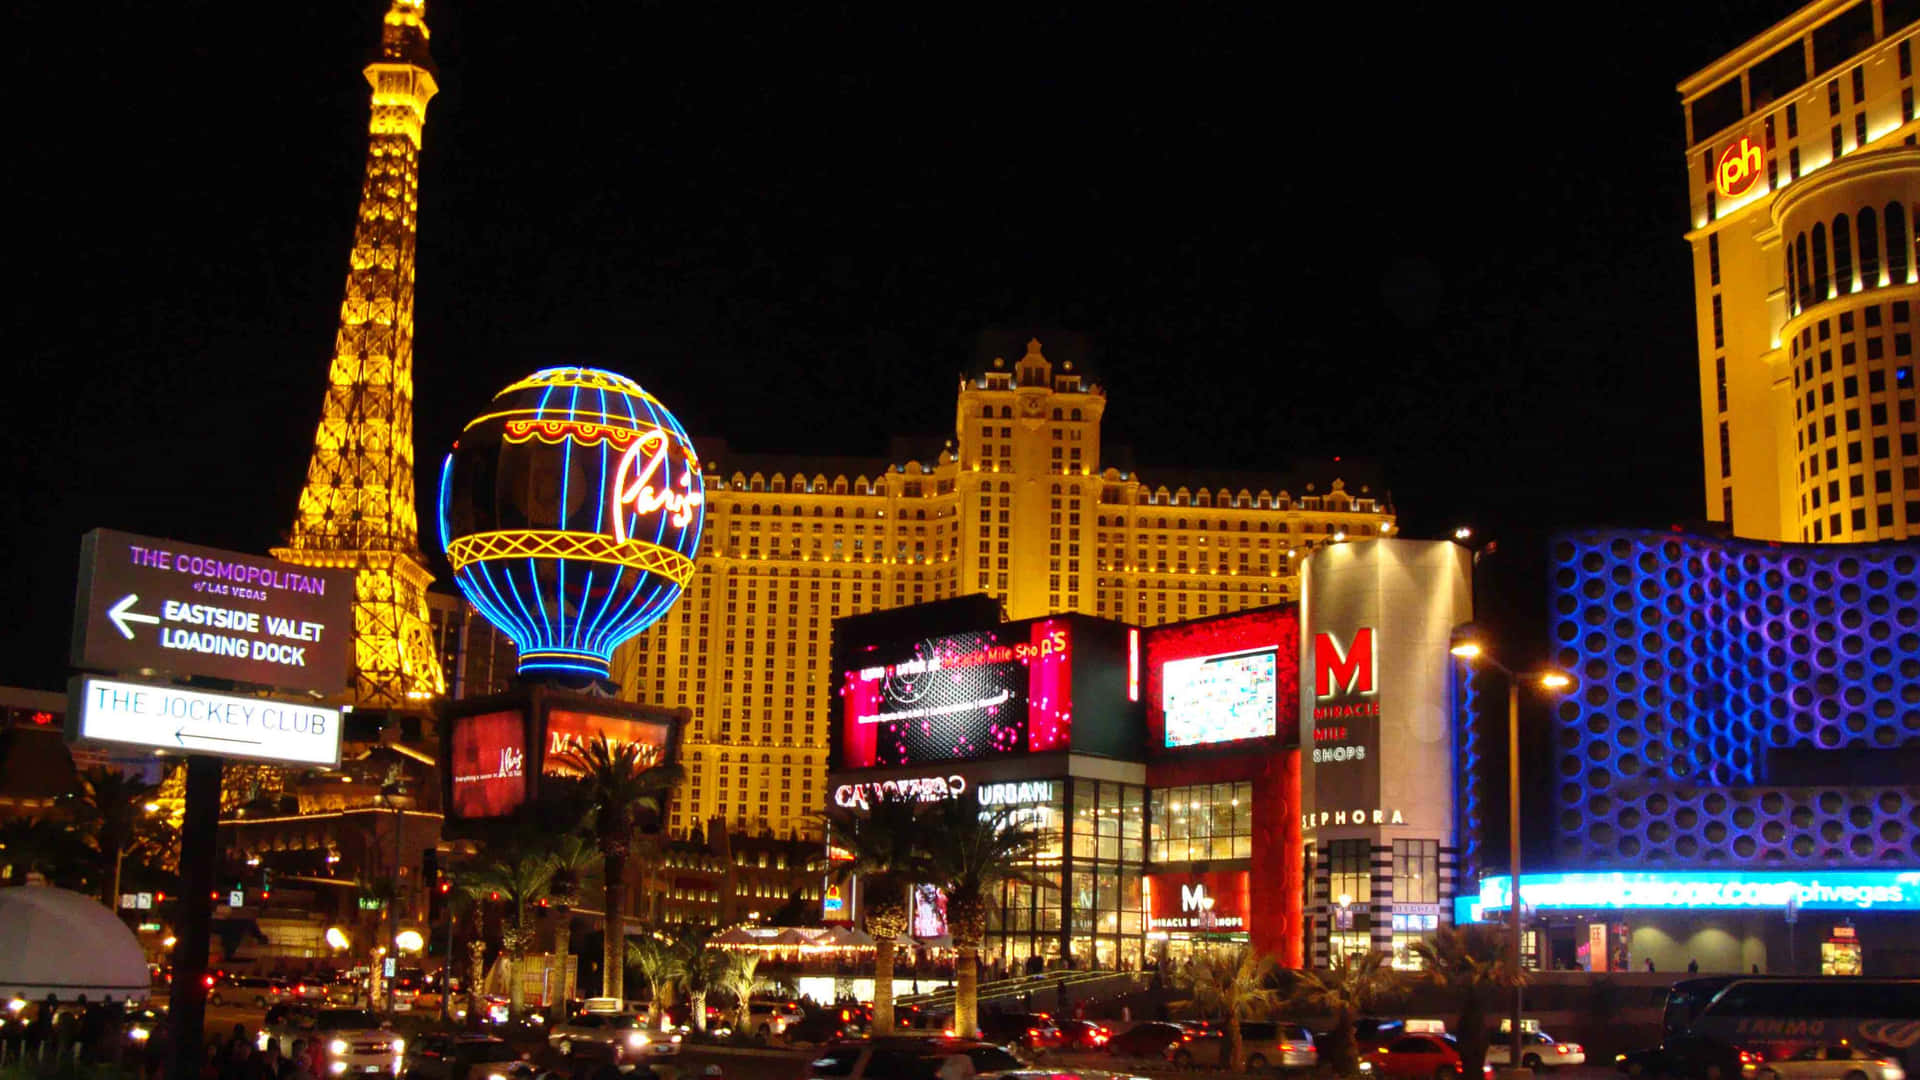 A Vibrant Nighttime View of the City of Las Vegas